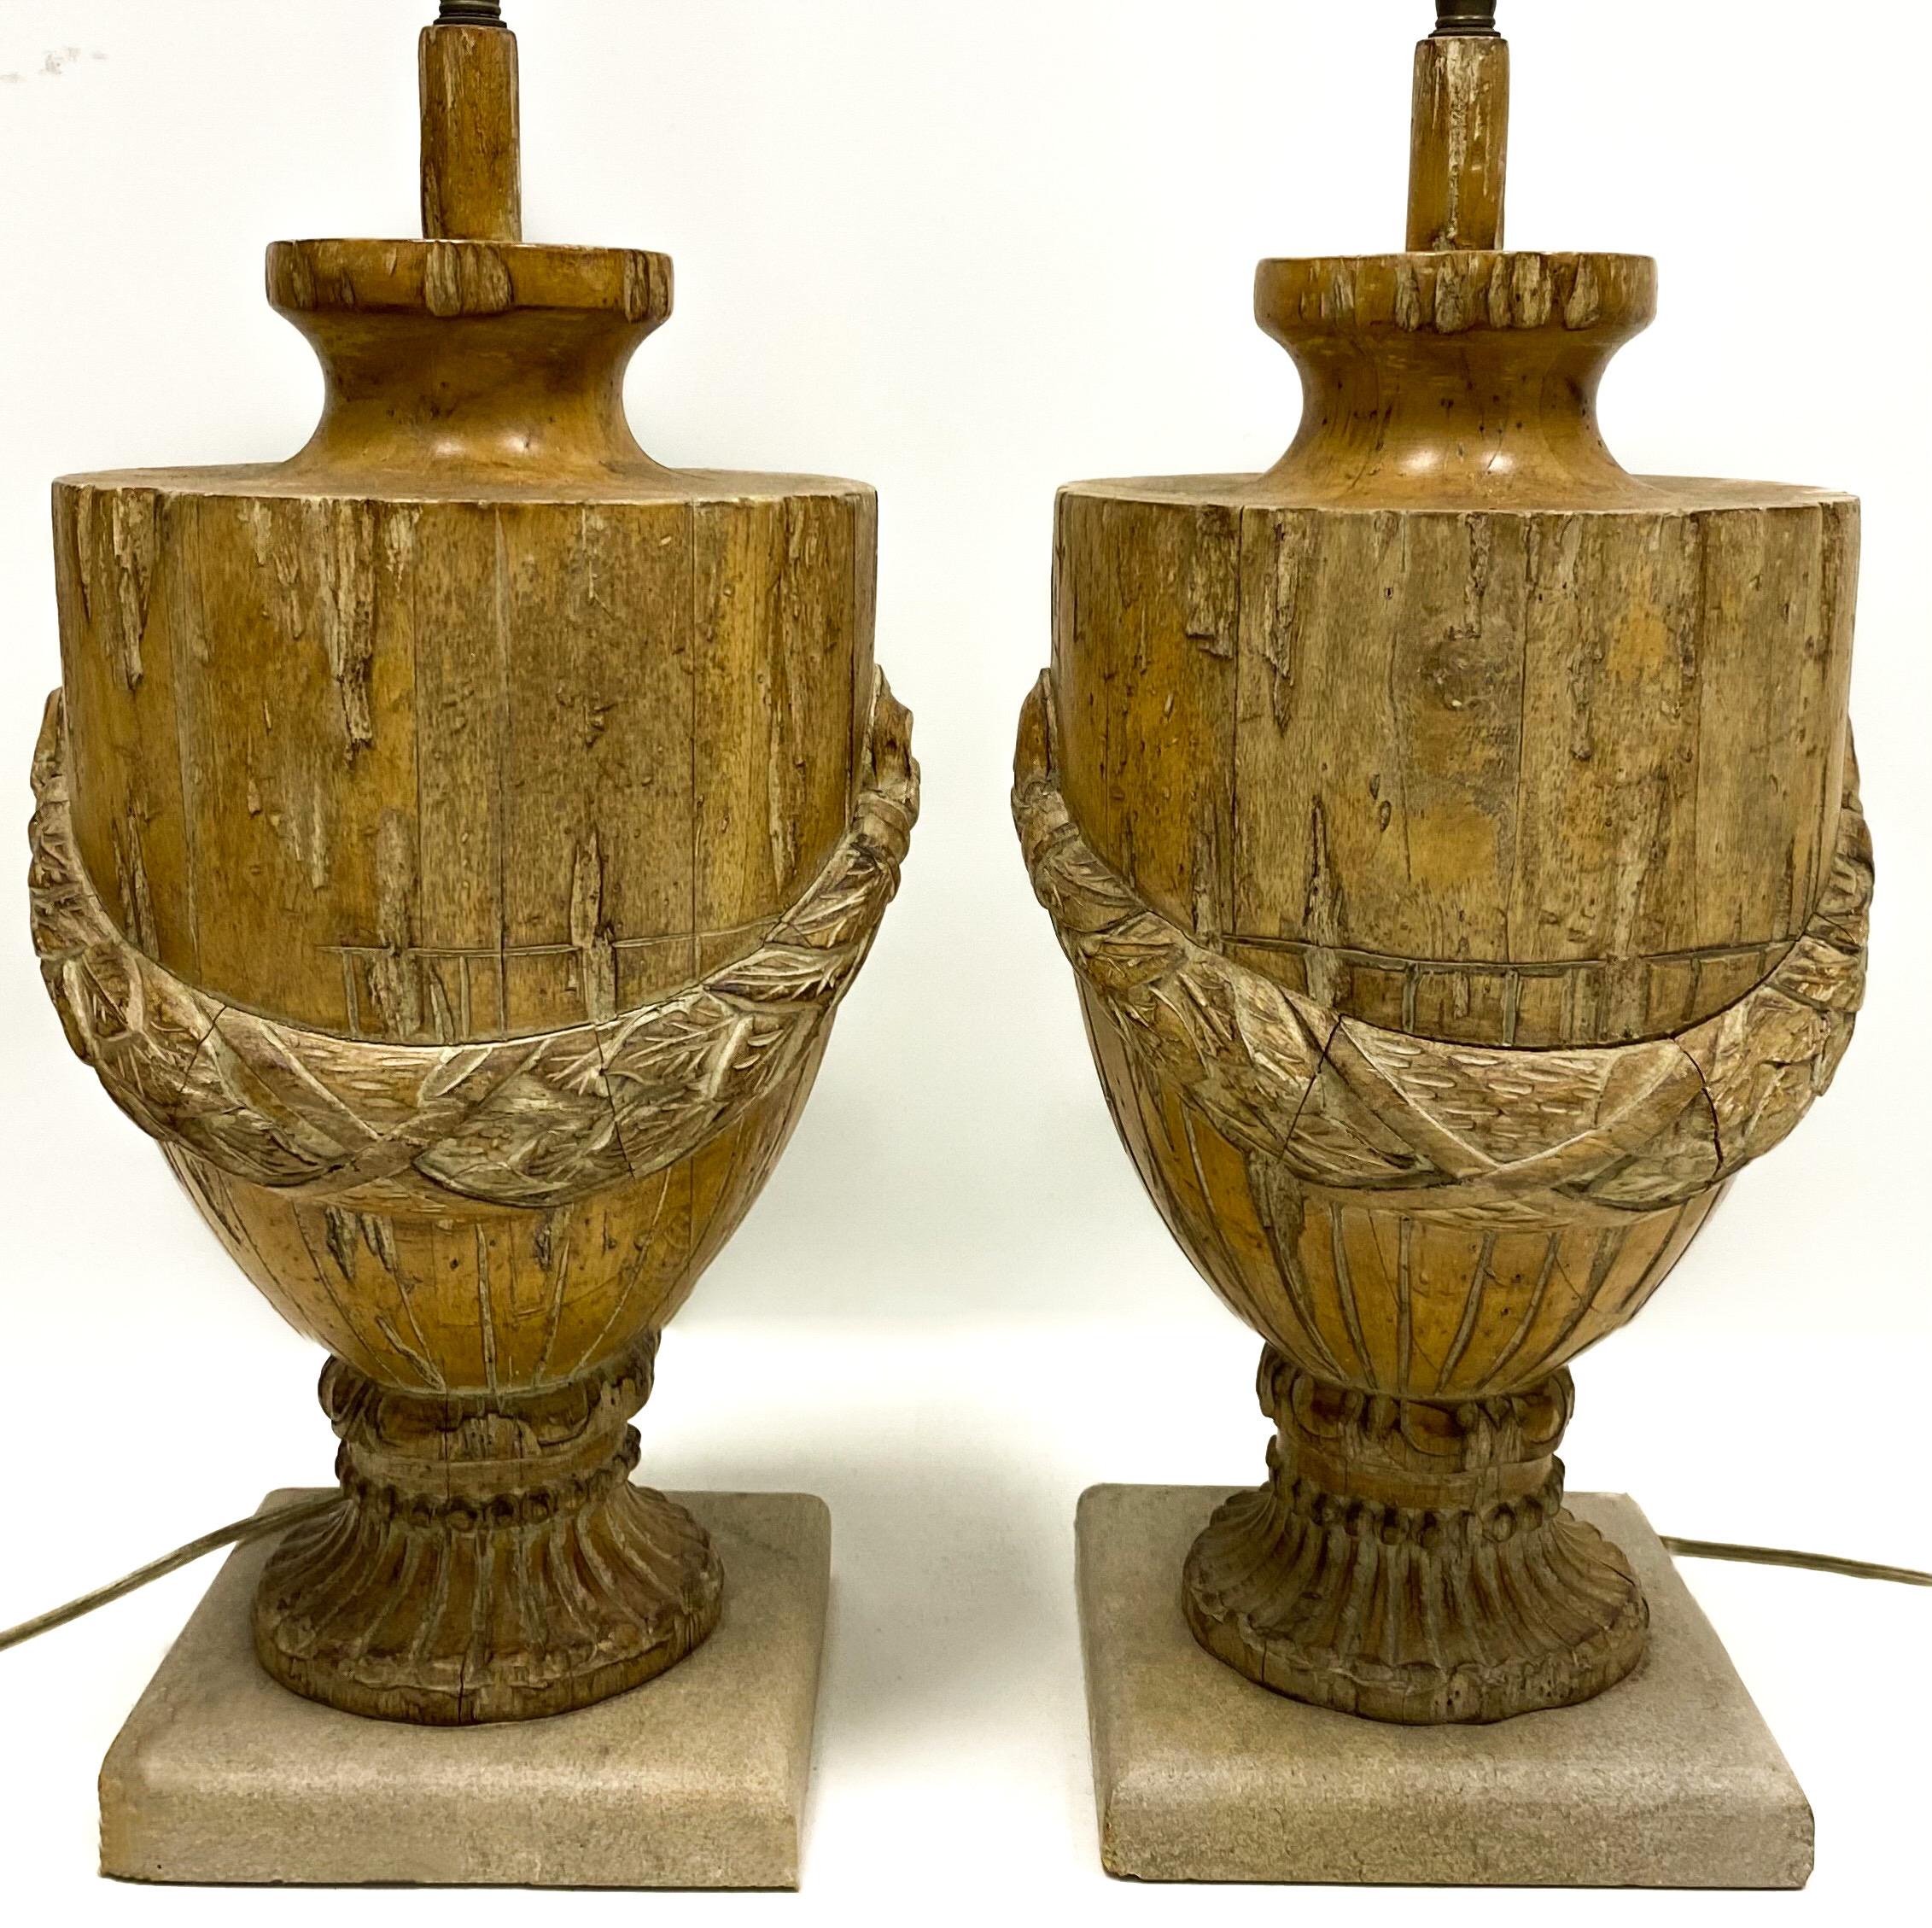 Sandstone Pair of 19th Century French Carved Urn Form Lamps with Neoclassical Styling